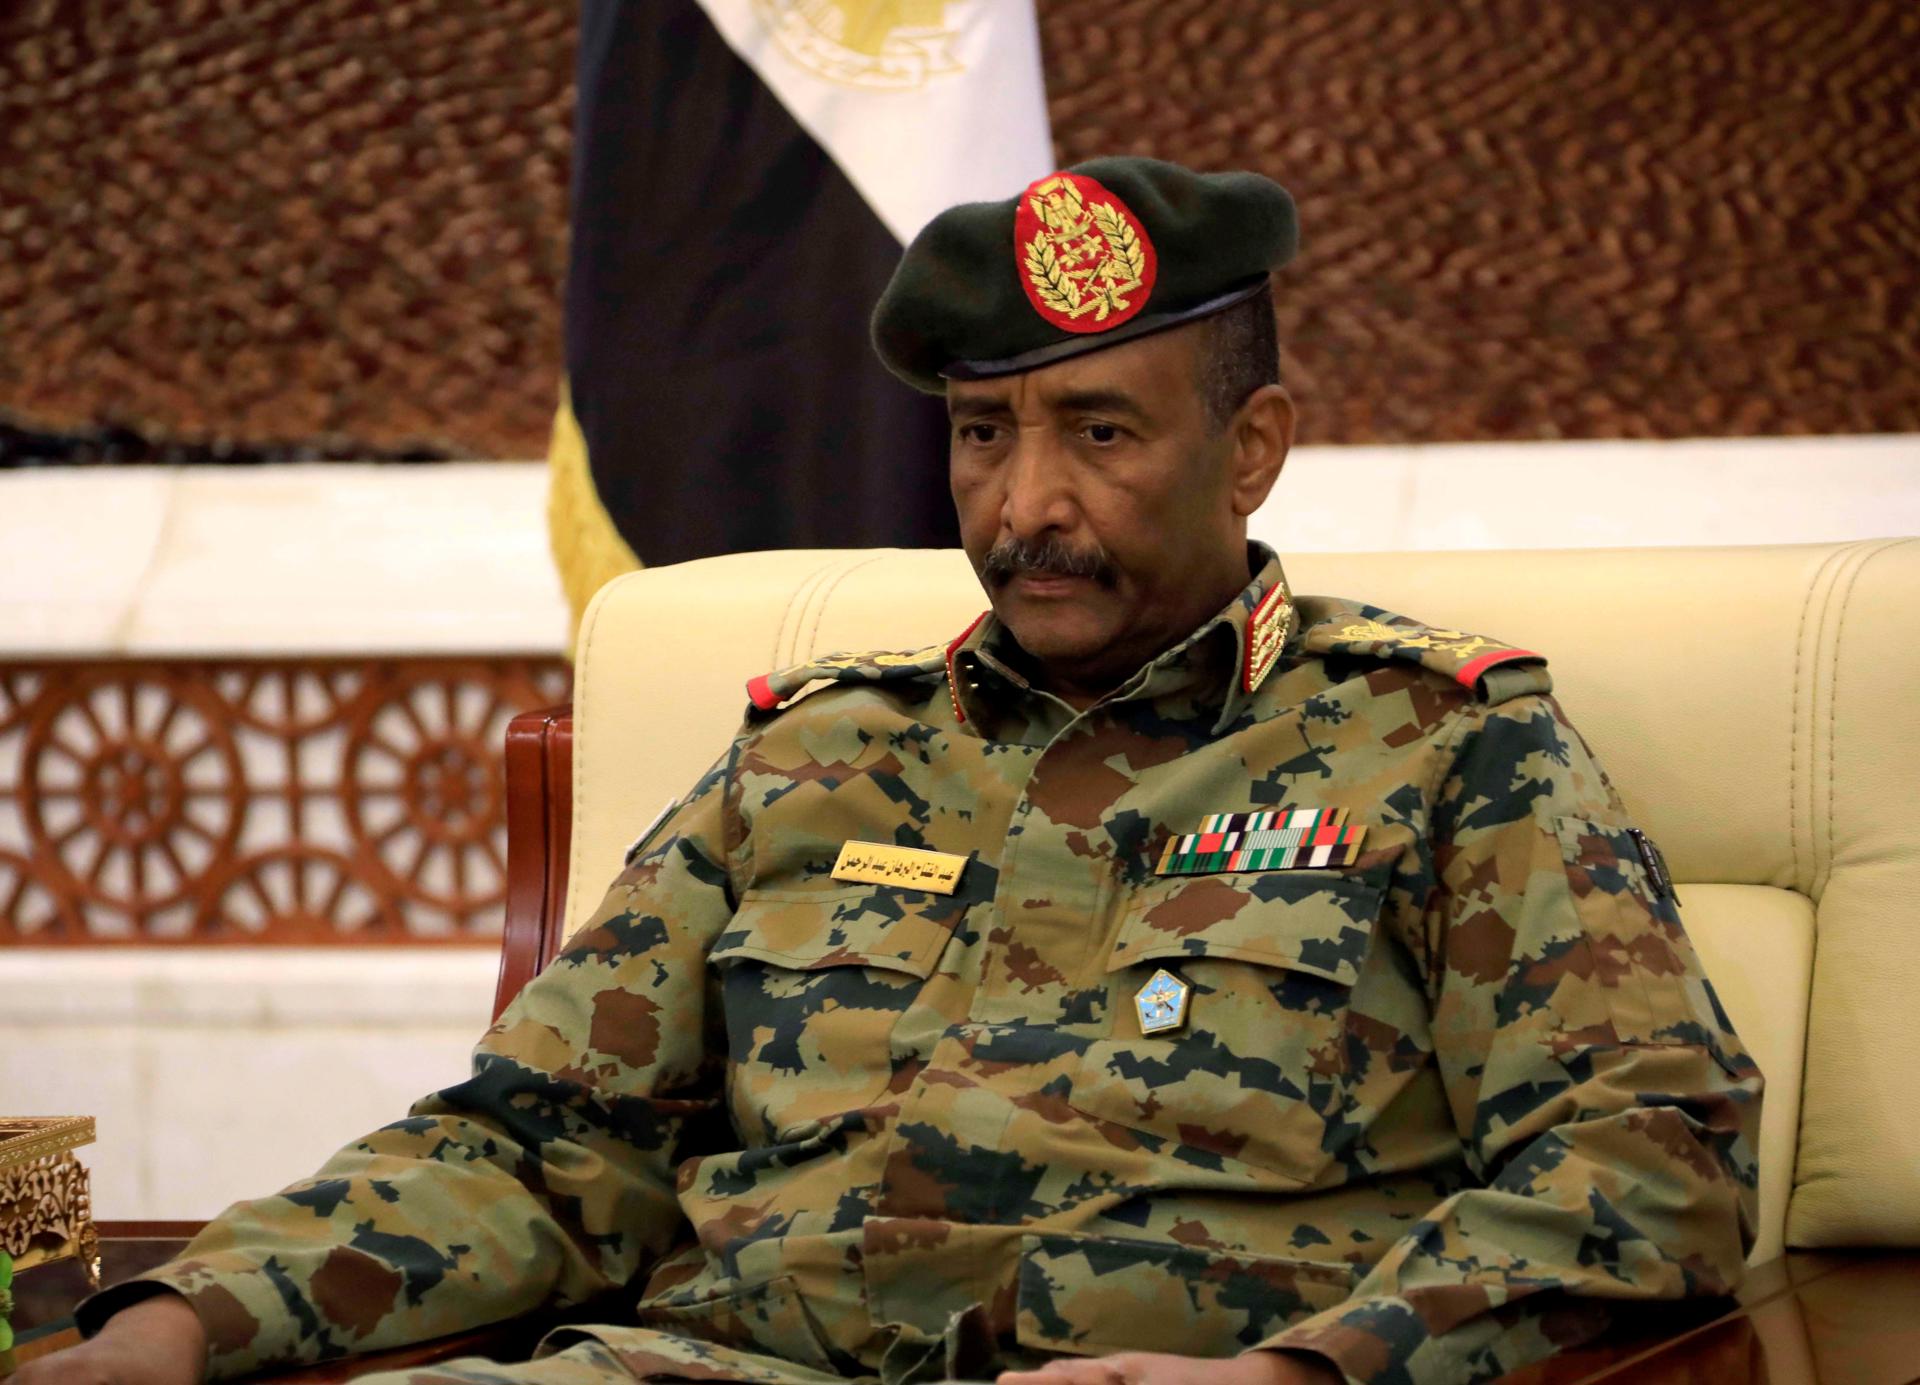 Leader of Sudan's transitional council, Lieutenant General Abdel Fattah Abdelrahman Burhan looks on after being sworn in as the Head of the newly formed transitional Council at the presidential palace in Khartoum, Sudan, 21 August 2019. EFE/EPA/STRINGER